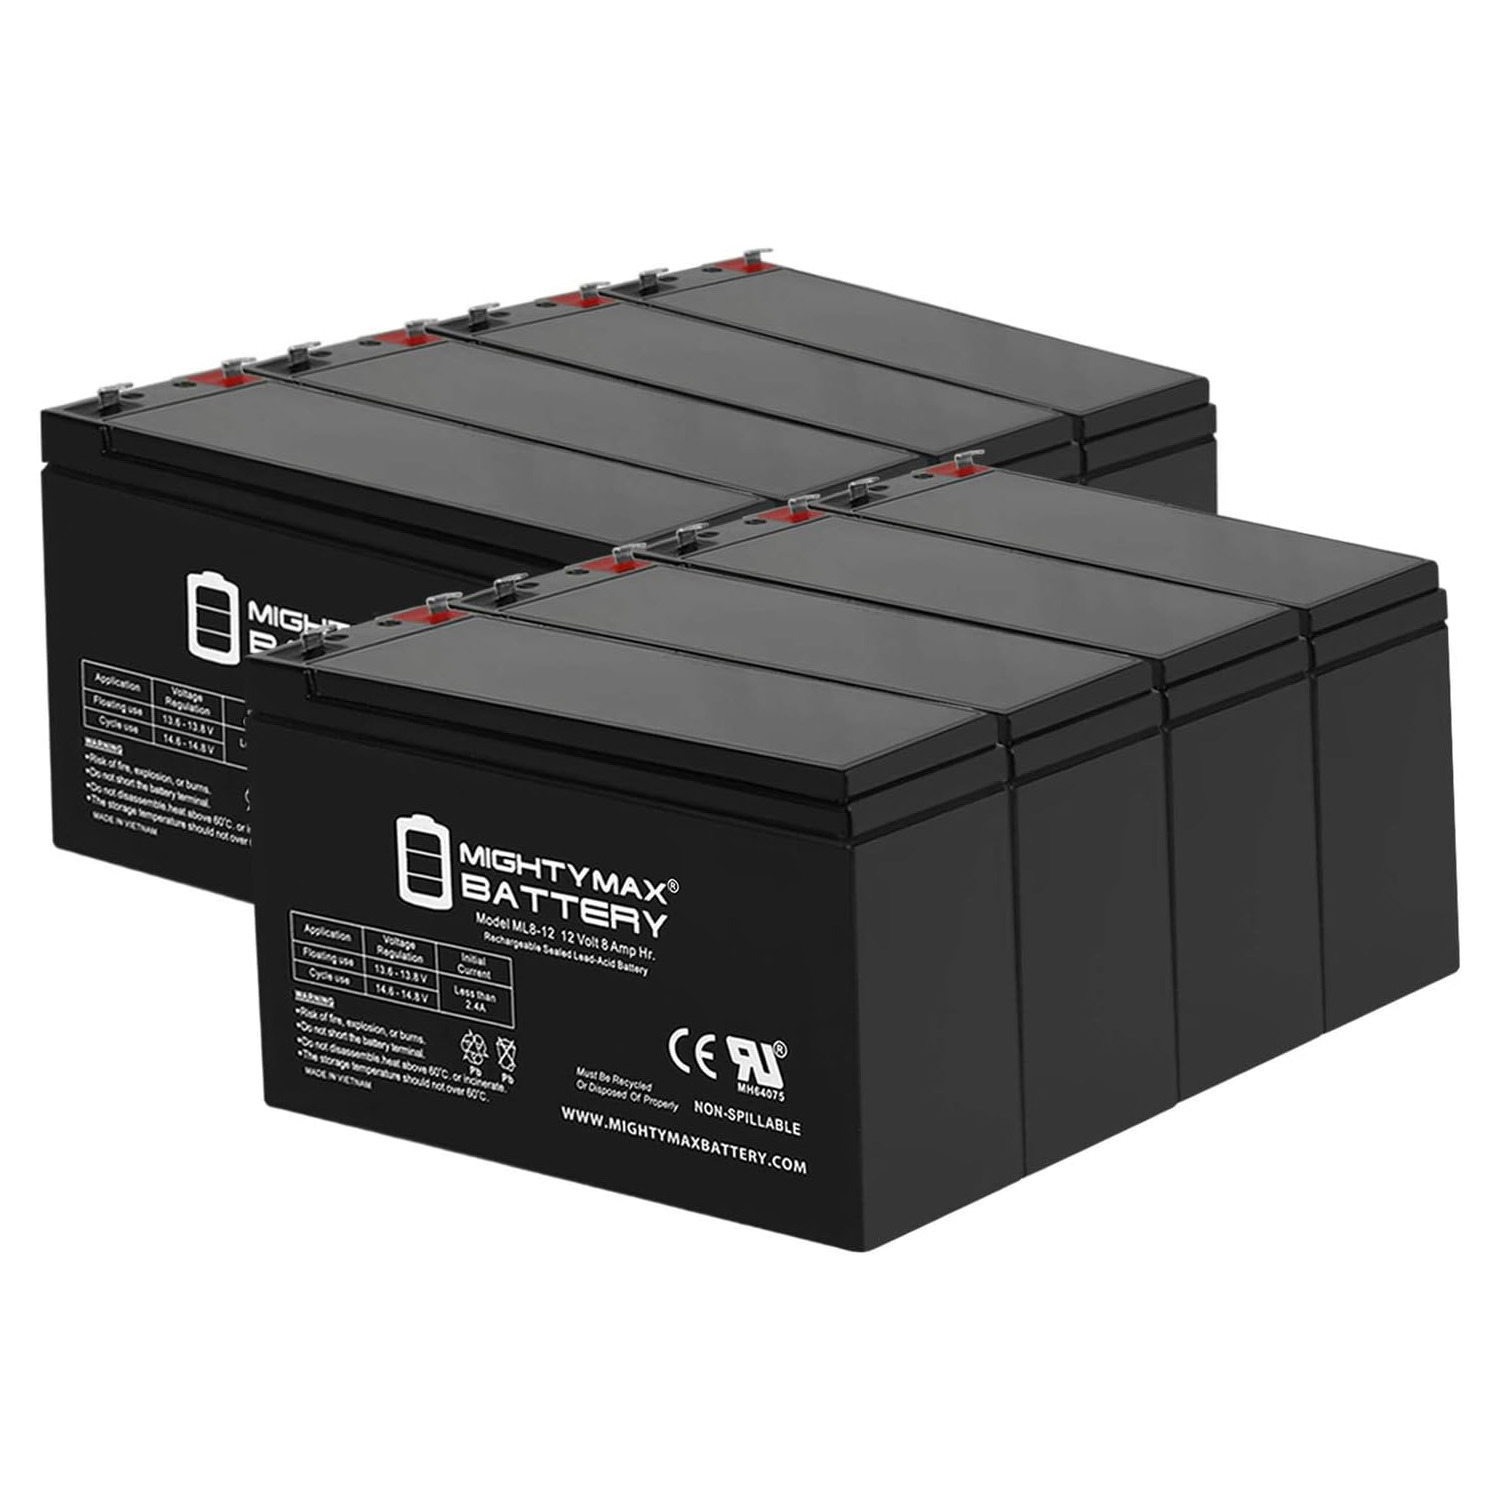 12V 8Ah Replacement Battery for Mitsubishi 7011AR-15-B UPS - 8 Pack